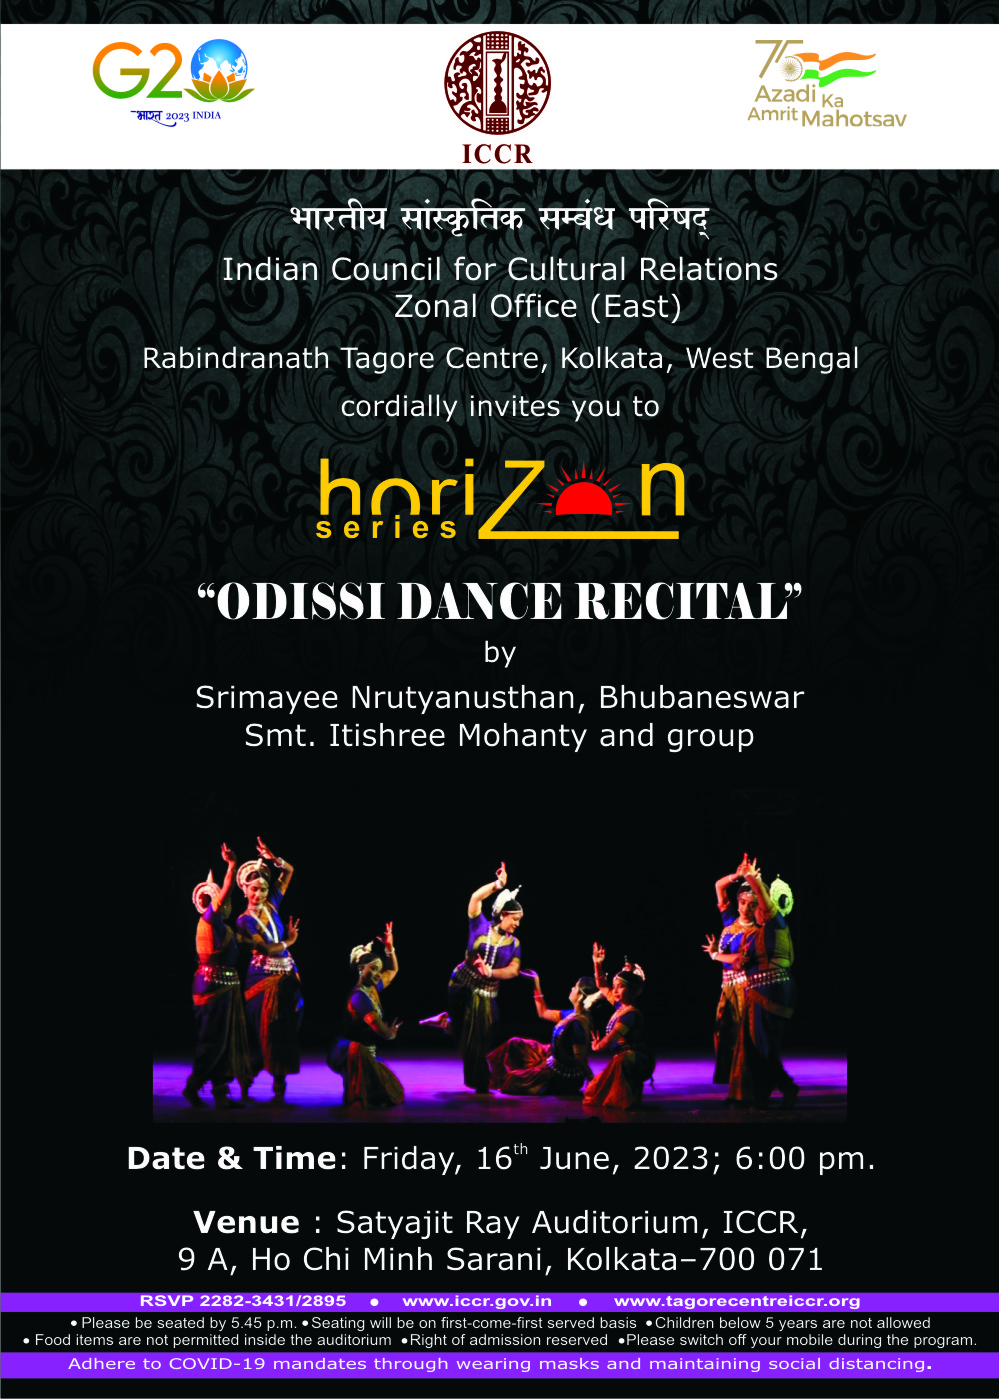 Indian Council for Cultural Relations (ICCR), Zonal Office (East), Kolkata cordially invites you to Horizon Series programme “ODISSI DANCE RECITAL” by Srimayee Nrutyanusthan, Bhubaneswar, Smt. Itishree Mohanty and Group on Friday, 16th June, 2023 at 6:00 pm. at Satyajit Ray Auditorium, Rabindranath Tagore Centre, 9 A Ho Chi Minh Sarani, Kolkata - 700071. Letter of invitation enclosed.